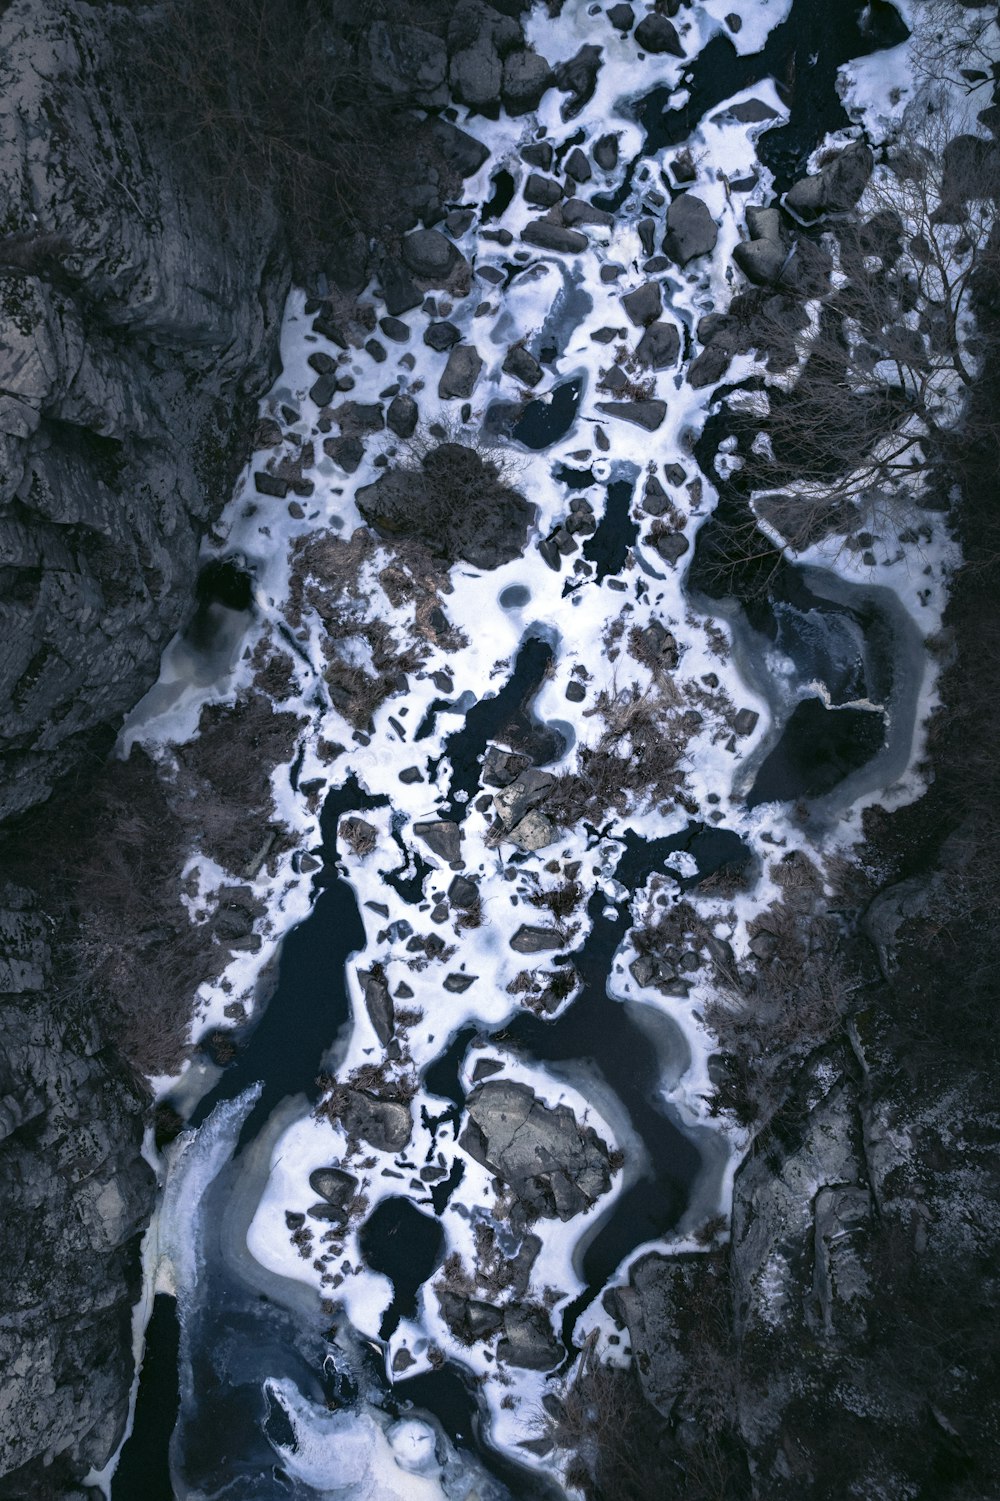 an aerial view of a river running through a rocky area